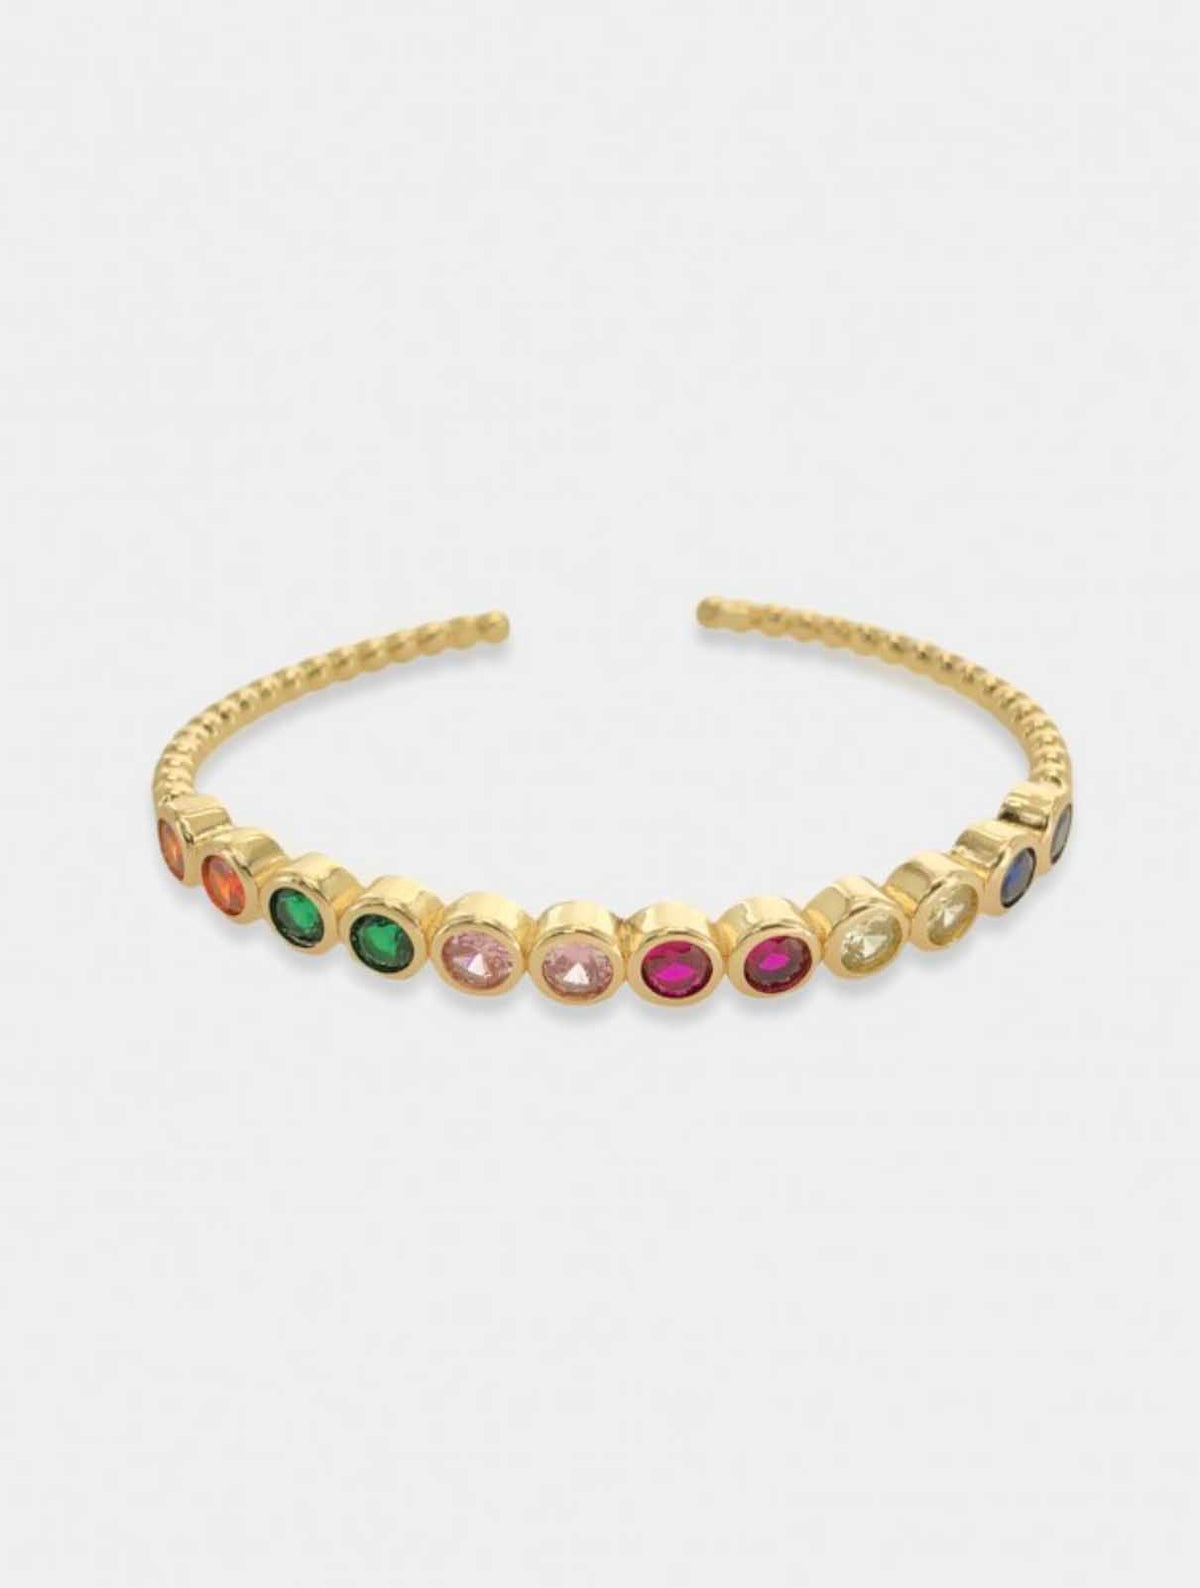 6776996036683-JAYNE-Gold-Cuff-with-Colored-Gems-